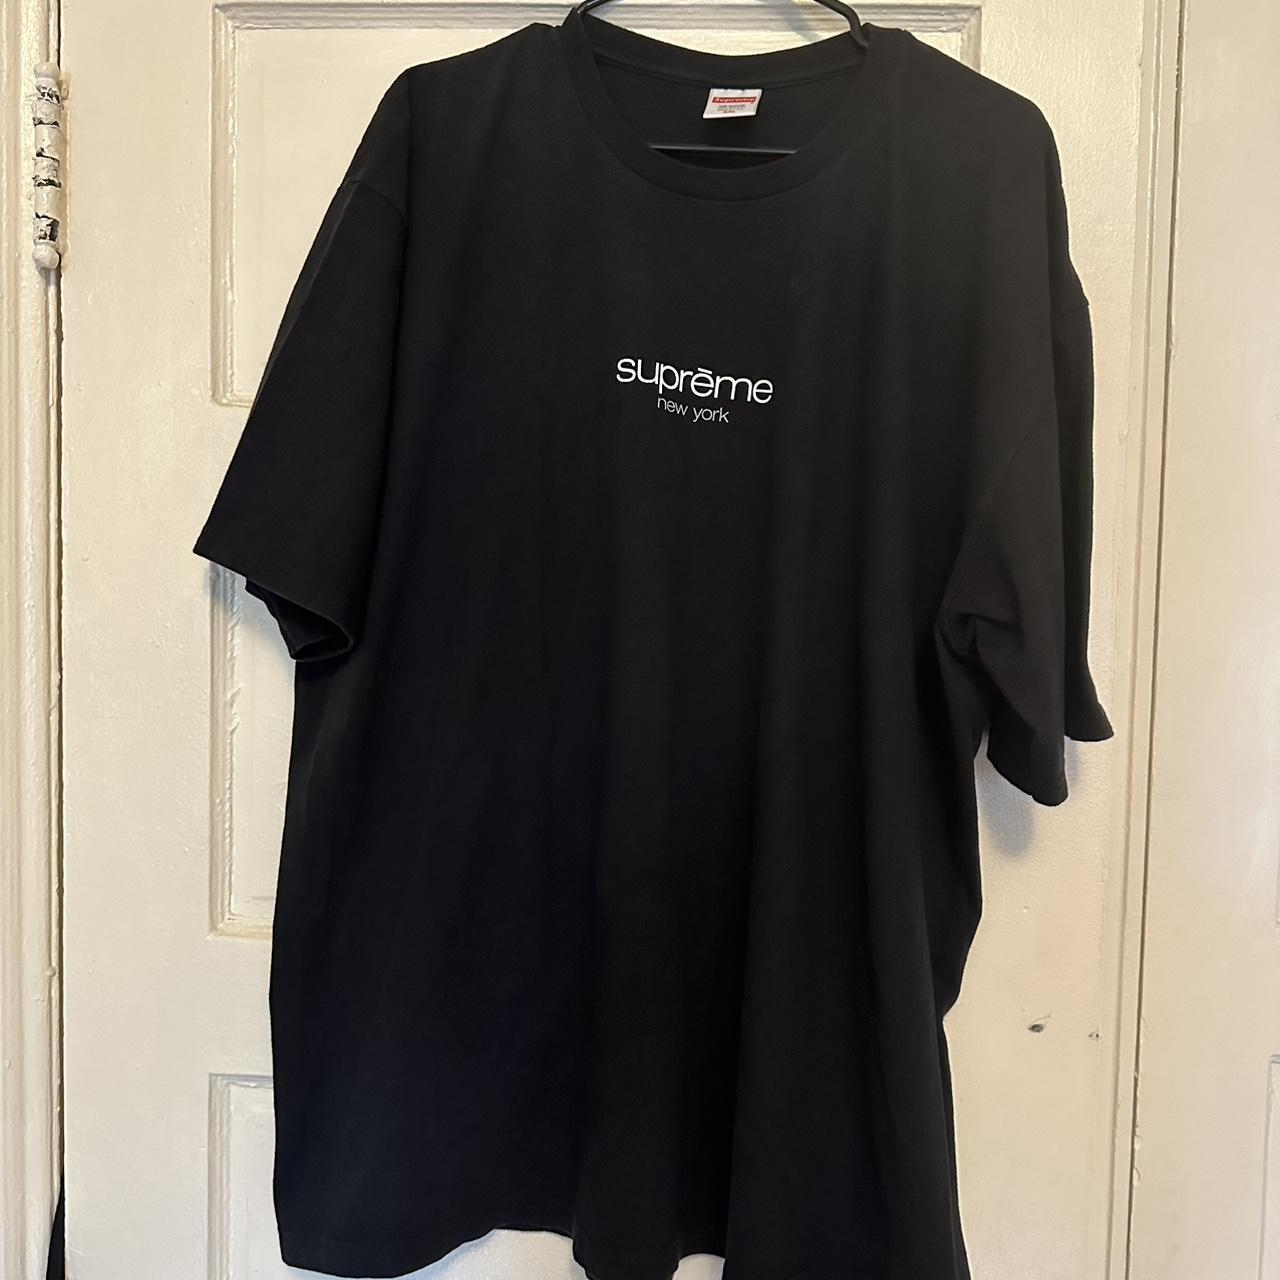 Supreme classic logo tee men’s size 2xl worn but in...